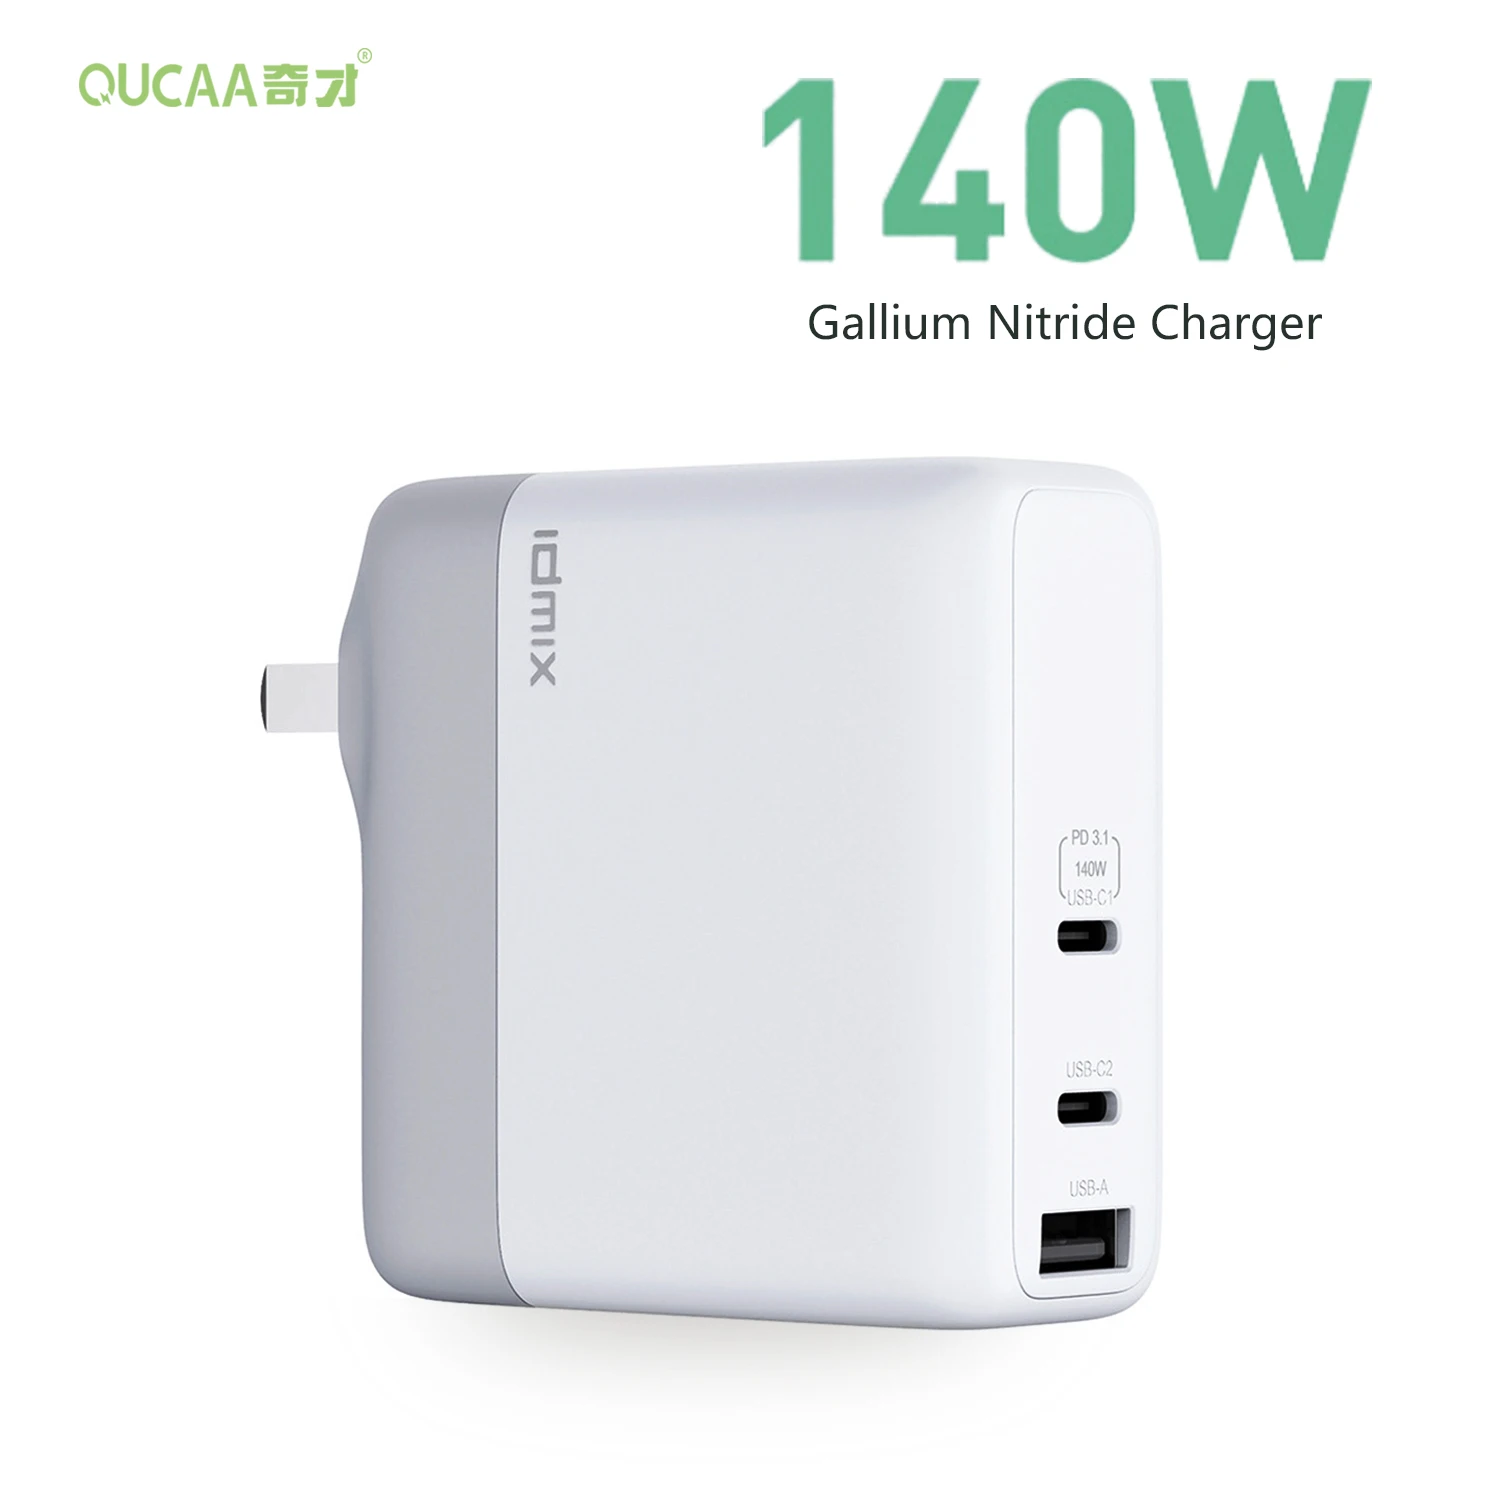 

140W Gallium Nitride USB Charger PD Smart Fast Charge Mobile Phone Charging Head QC3.1 Laptop Universal Fast Charge Source